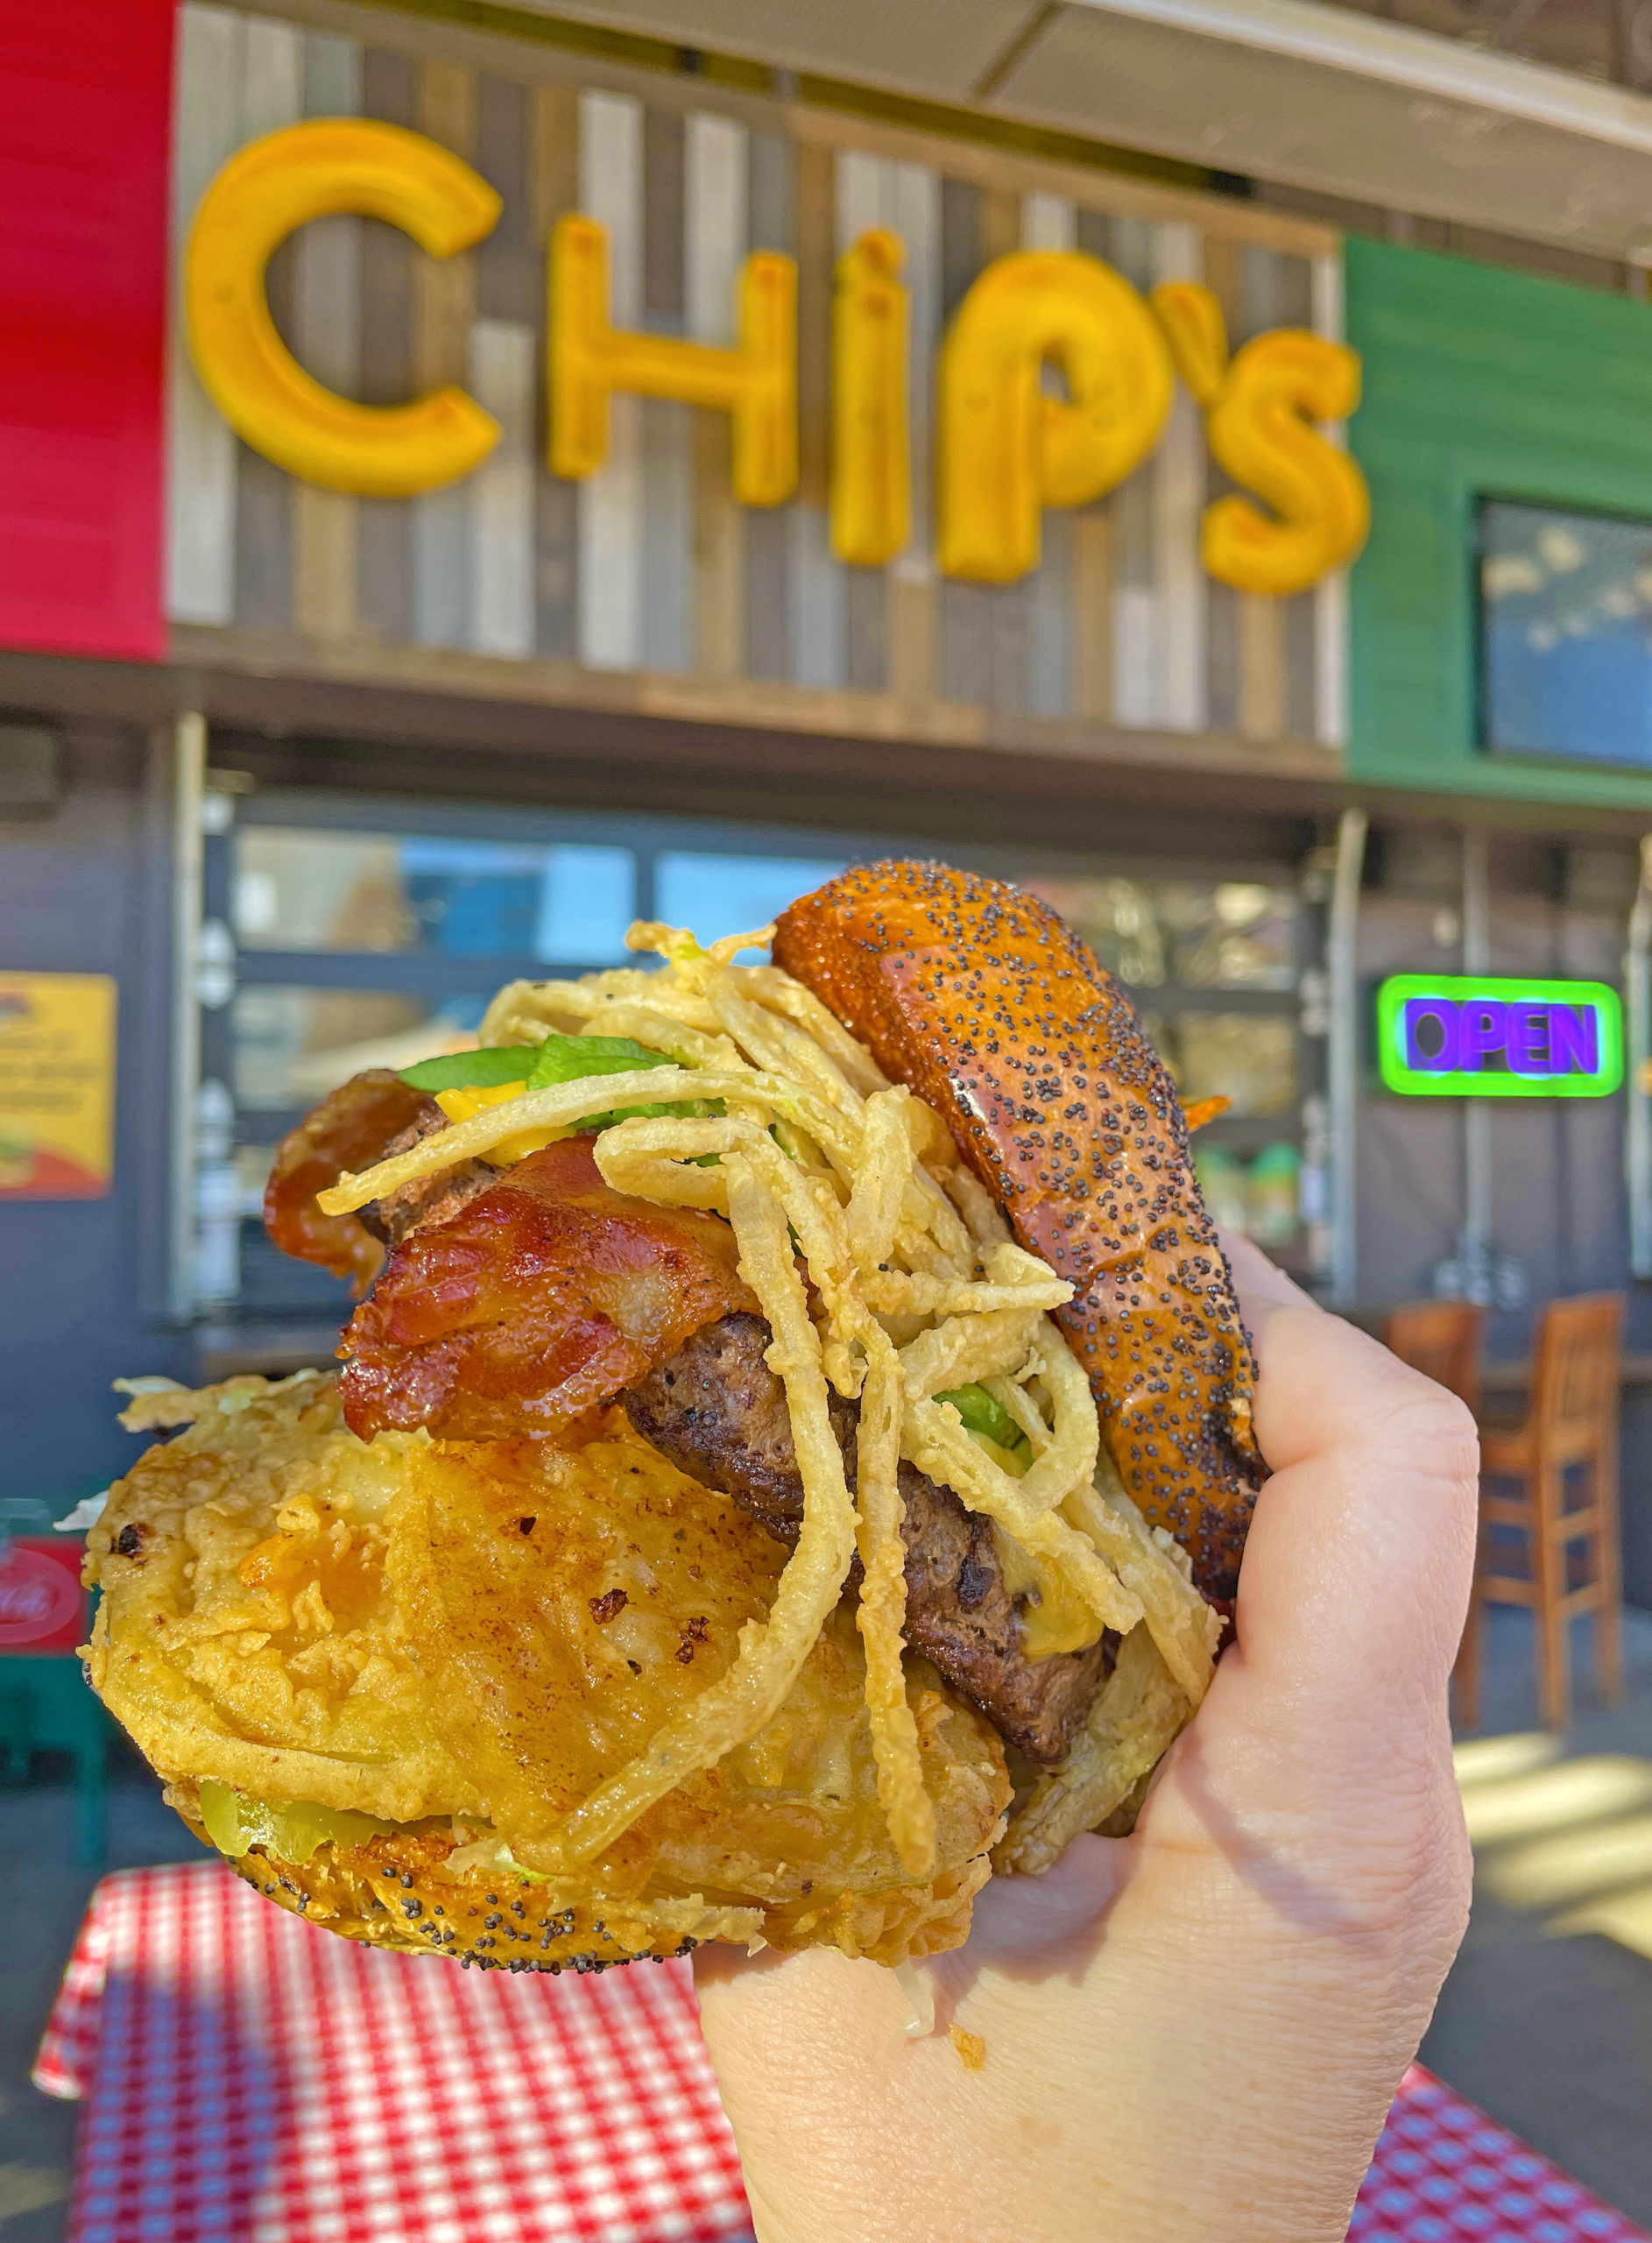 Chip's hamburger in hand with sign in the background